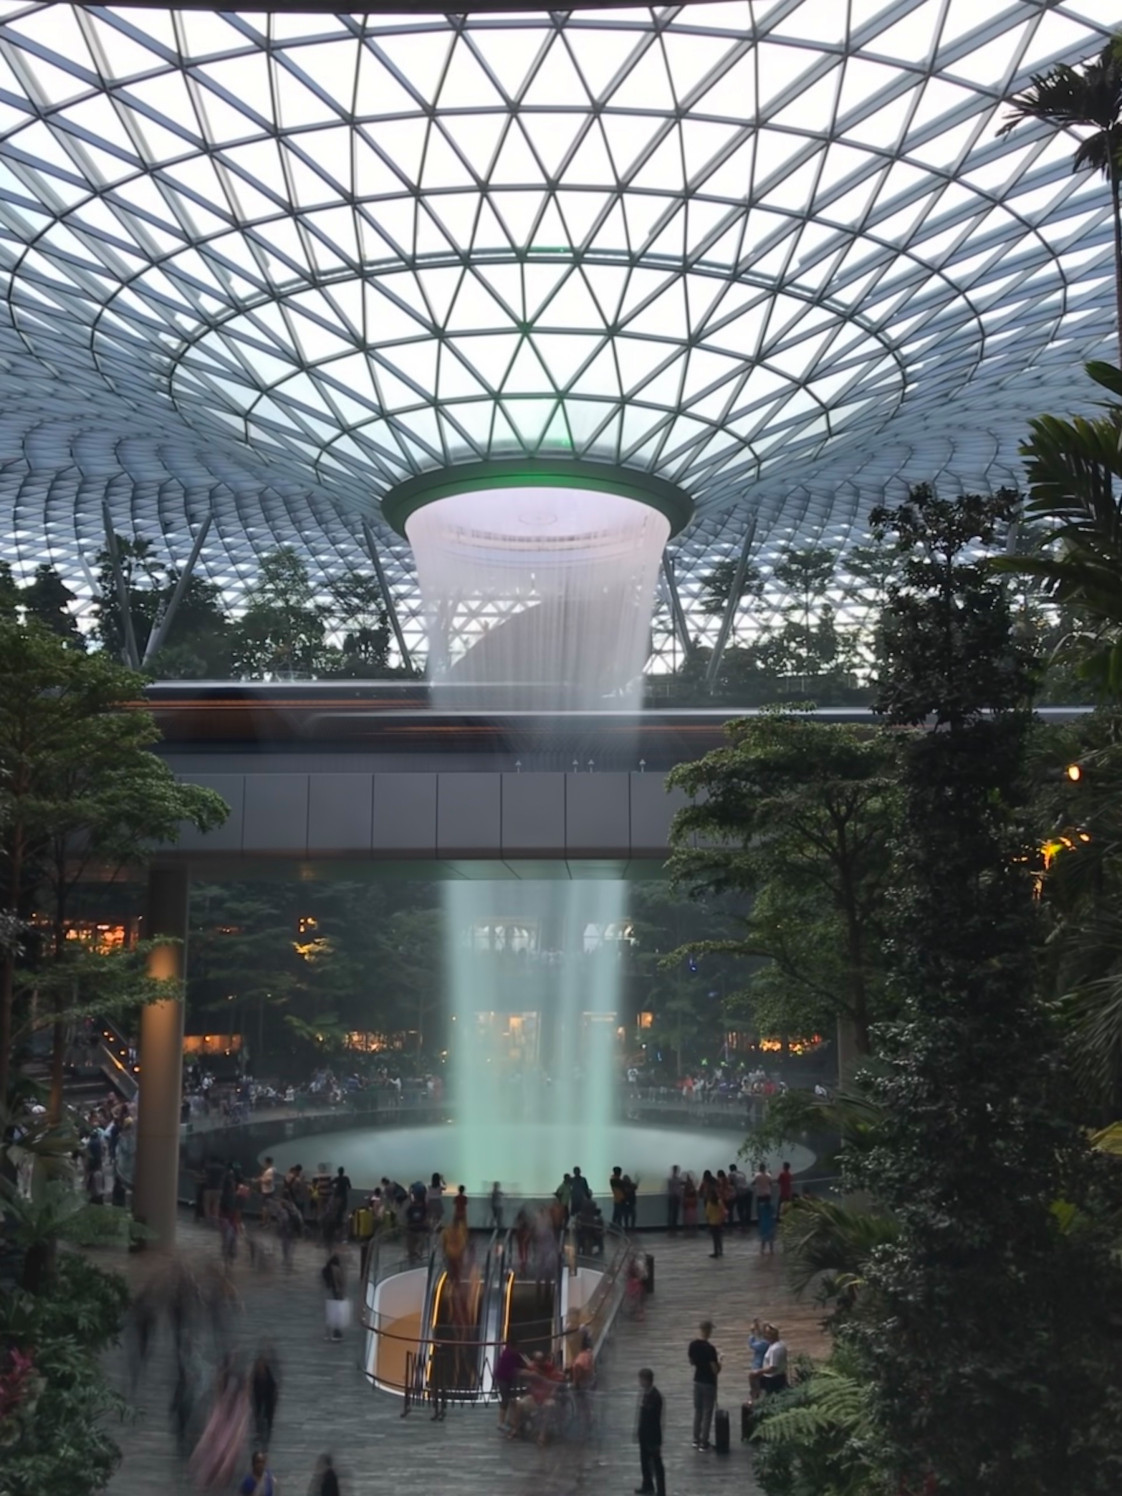 Jewel Changi Airport Photo Walk Launches Second Apple Store in Singapore